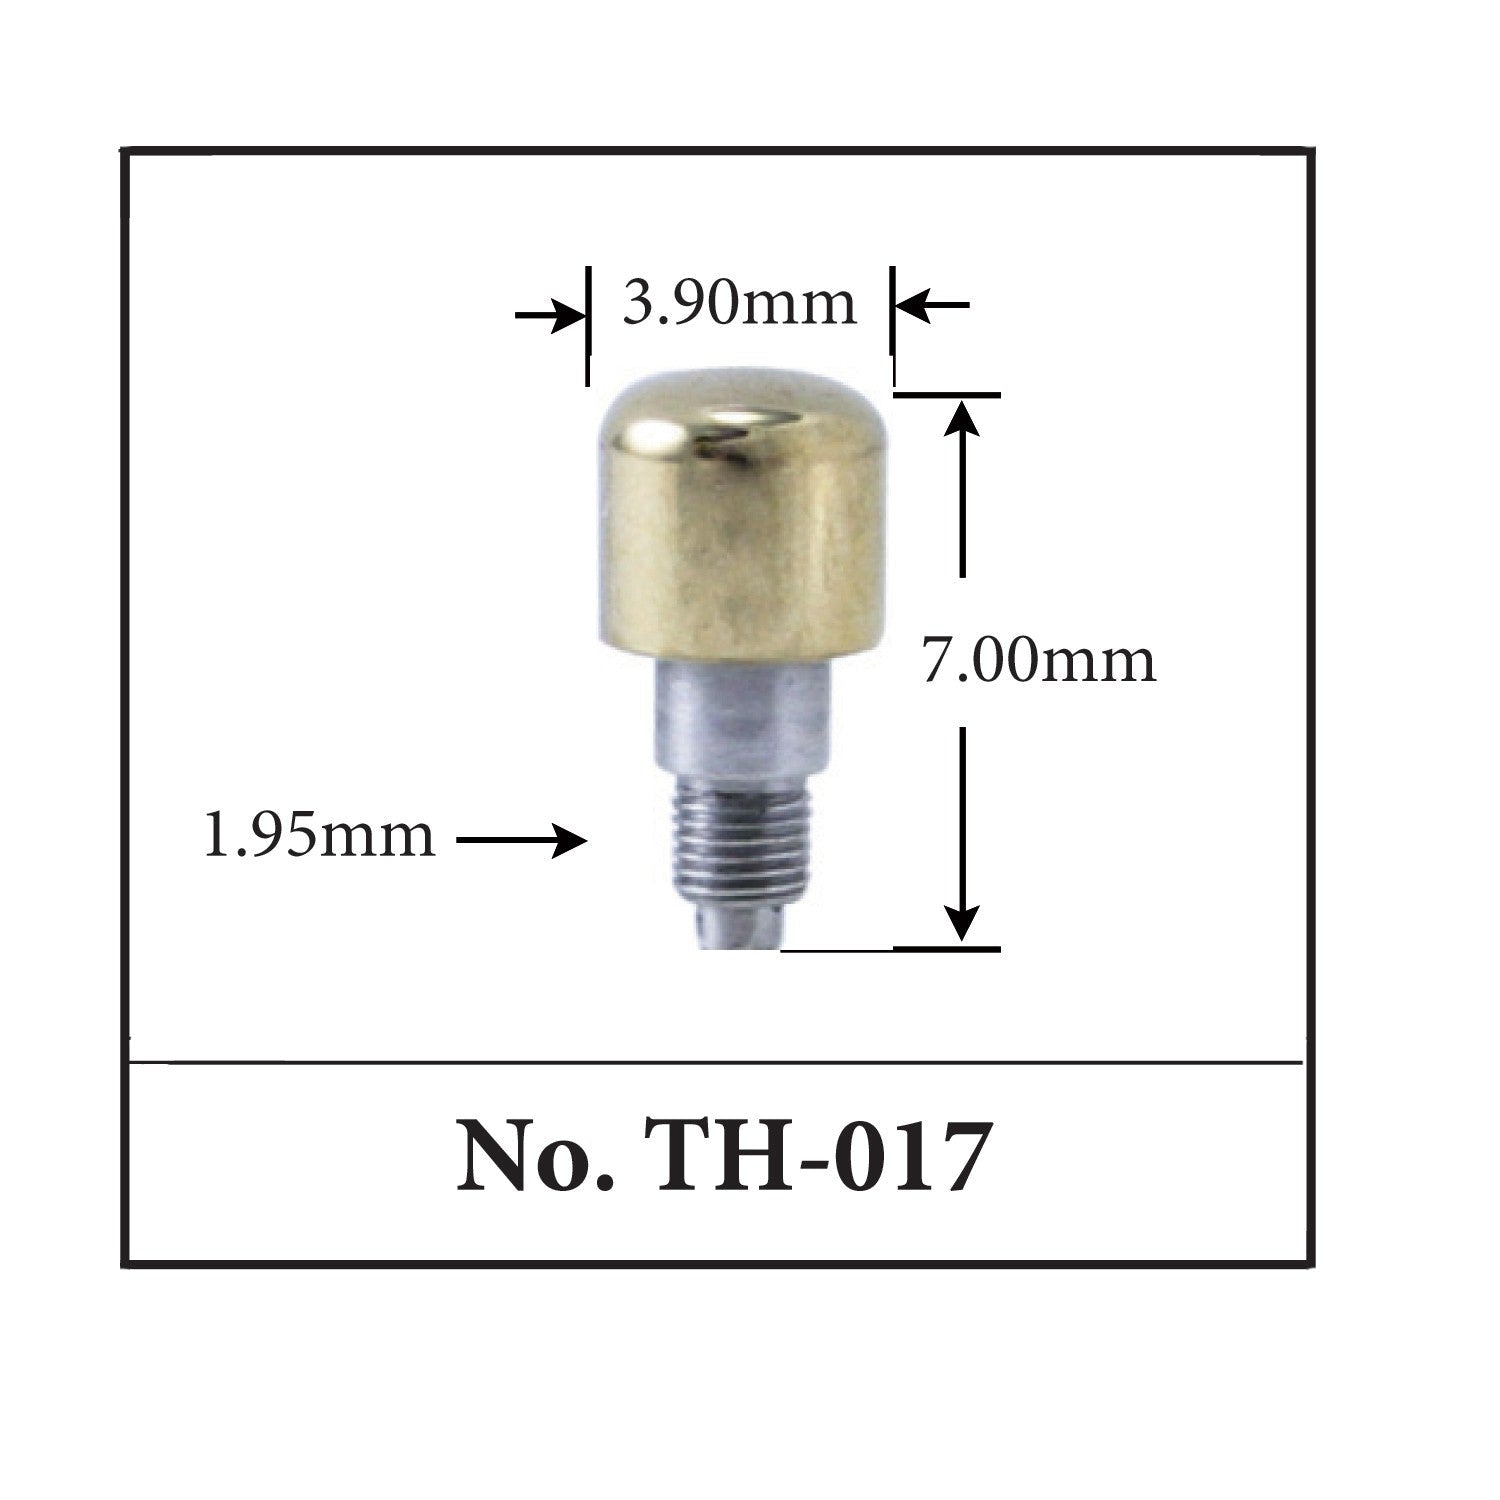 TH-017, Generic Pusher for TAG. (3.90mm x 7.00mm x 1.95mm)